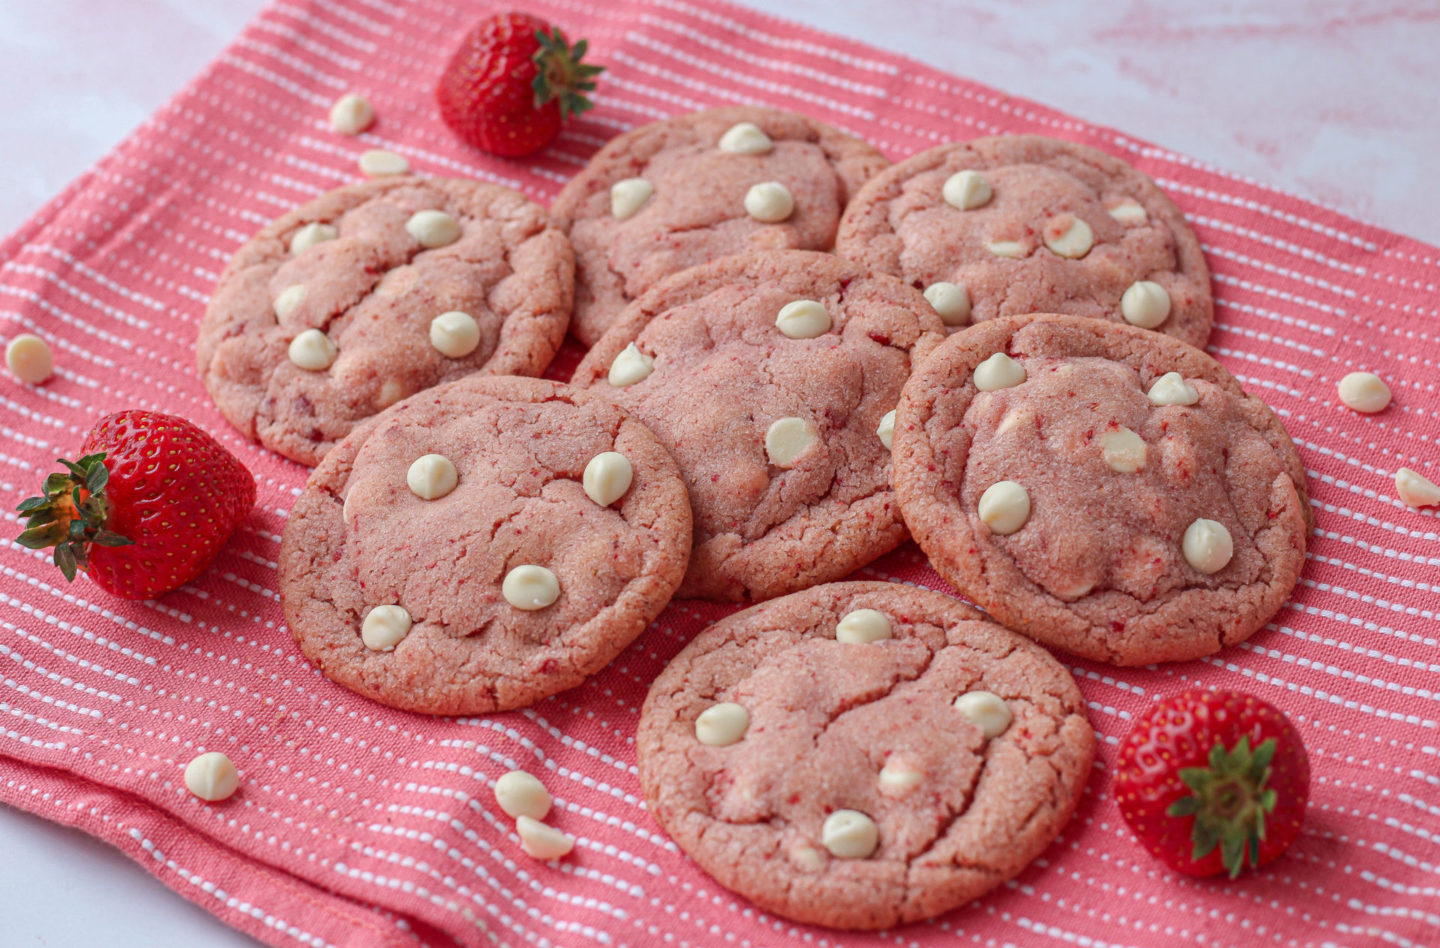 Several strawberry white chocolate cookies on a pink tea towel